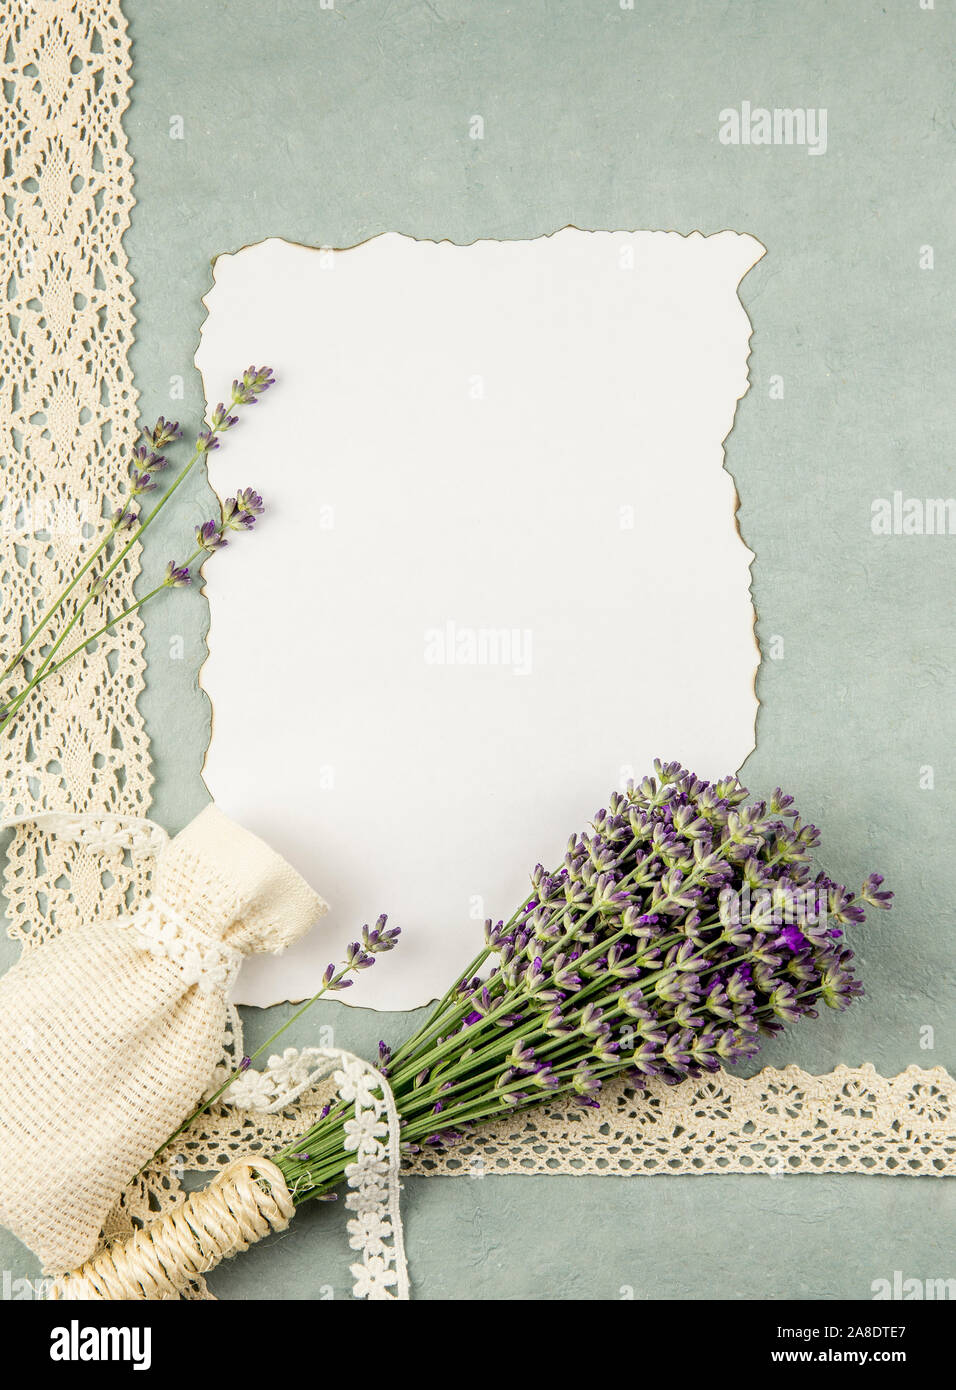 https://c8.alamy.com/comp/2A8DTE7/top-view-of-white-empty-sheet-of-paper-with-burned-edges-and-surrounded-by-fresh-lavender-branches-and-scented-dry-lavender-bag-sachet-on-old-blue-pap-2A8DTE7.jpg